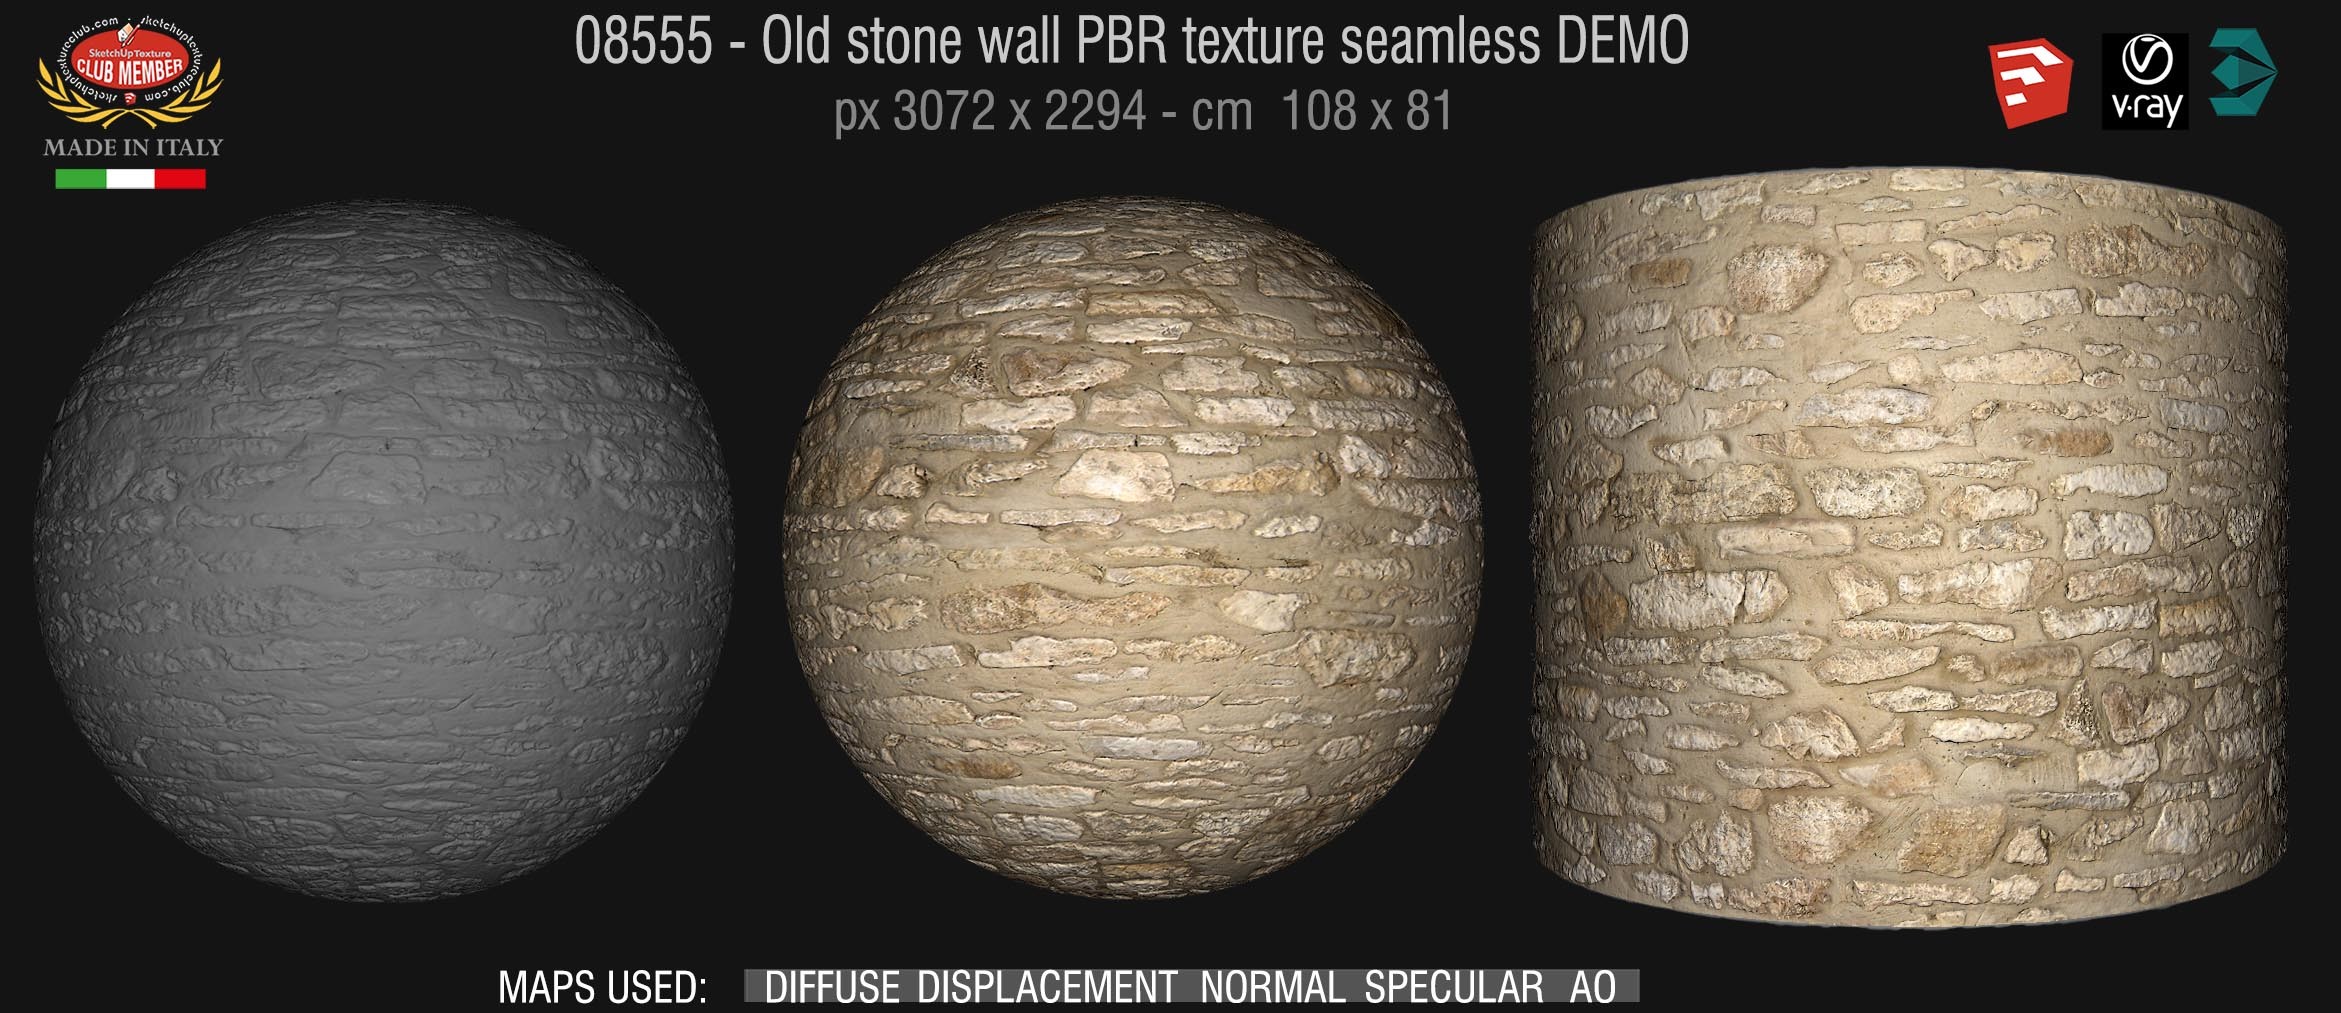 08555 Old stone wall PBR texture seamless DEMO